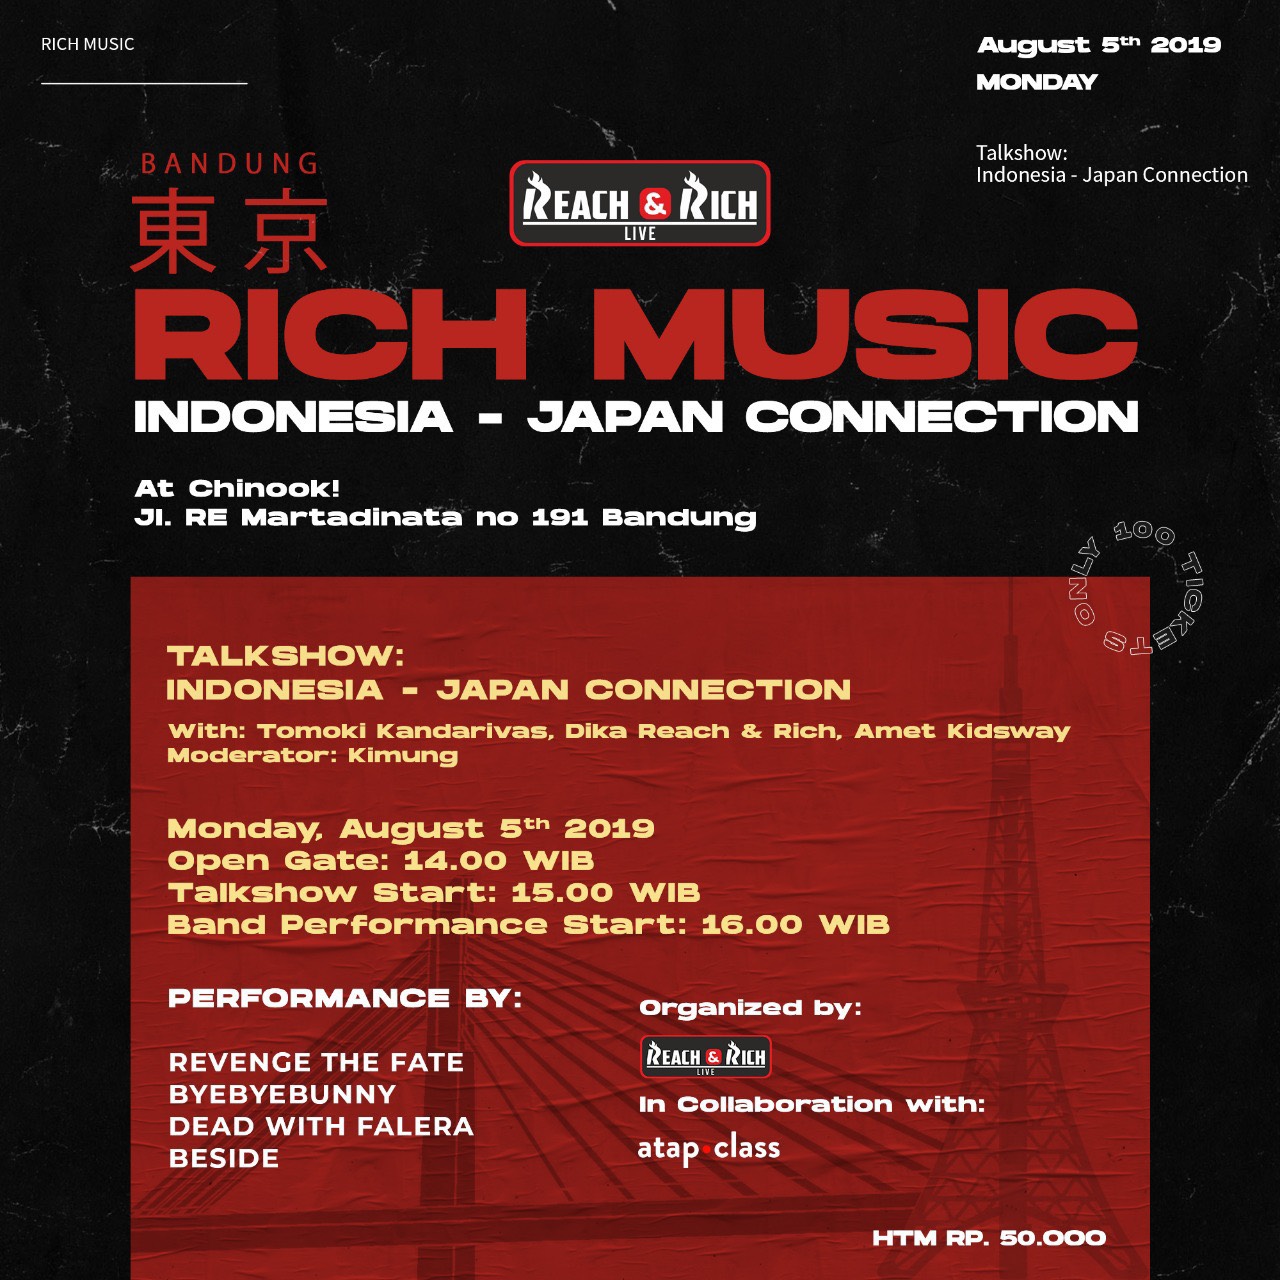 【RICH MUSIC Indonesia - Japan Connection】